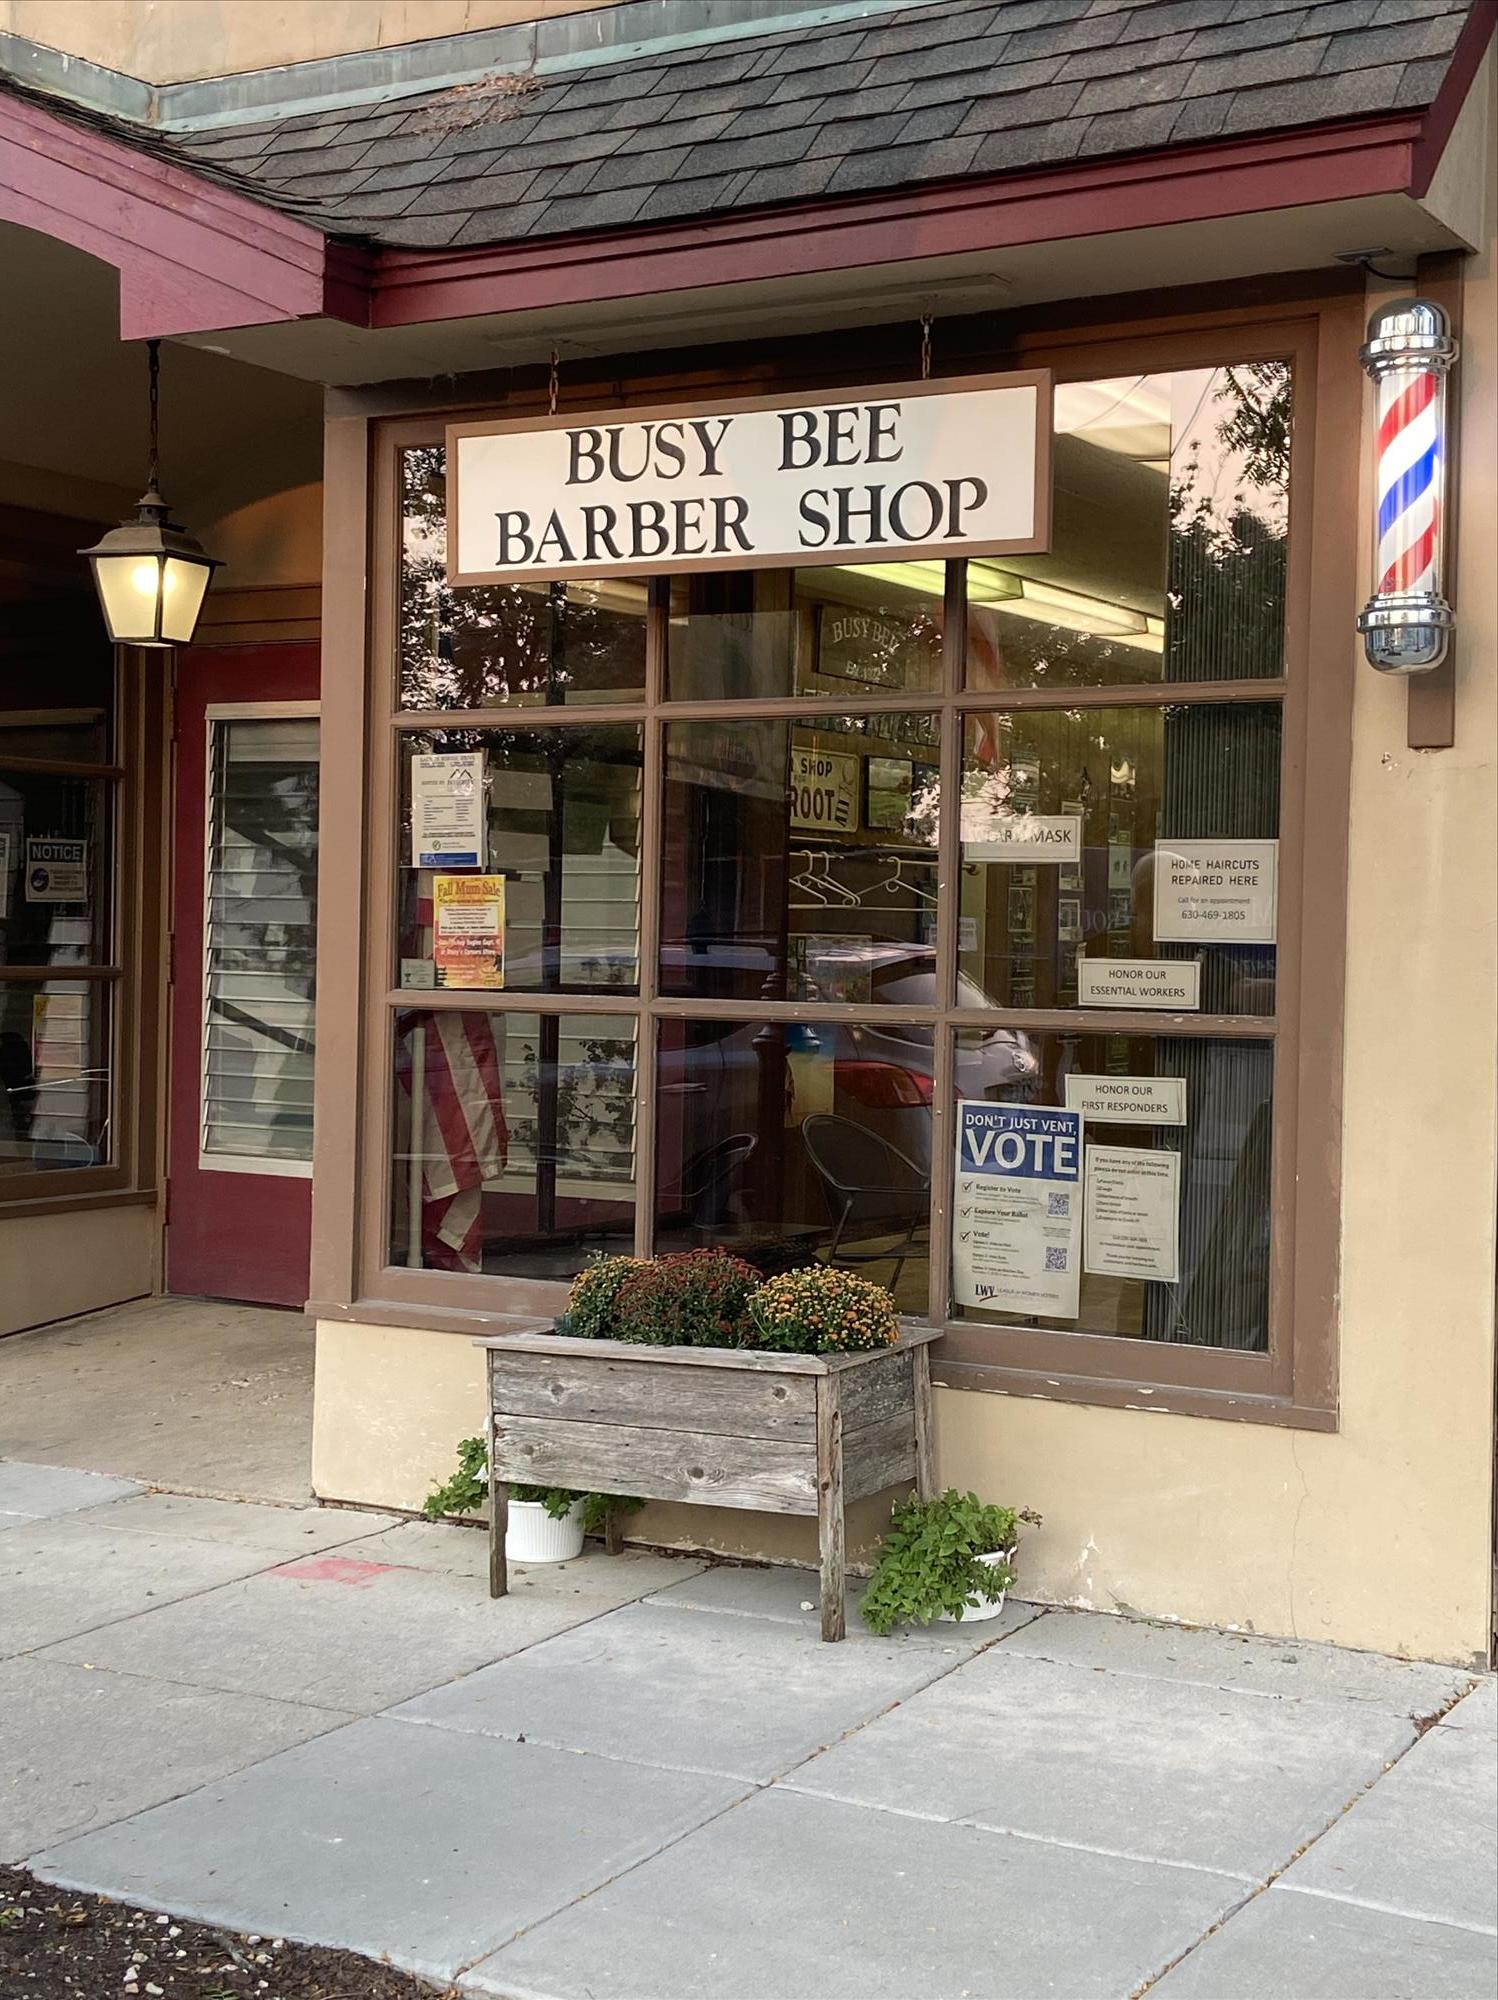 Busy Bee Barber Shop